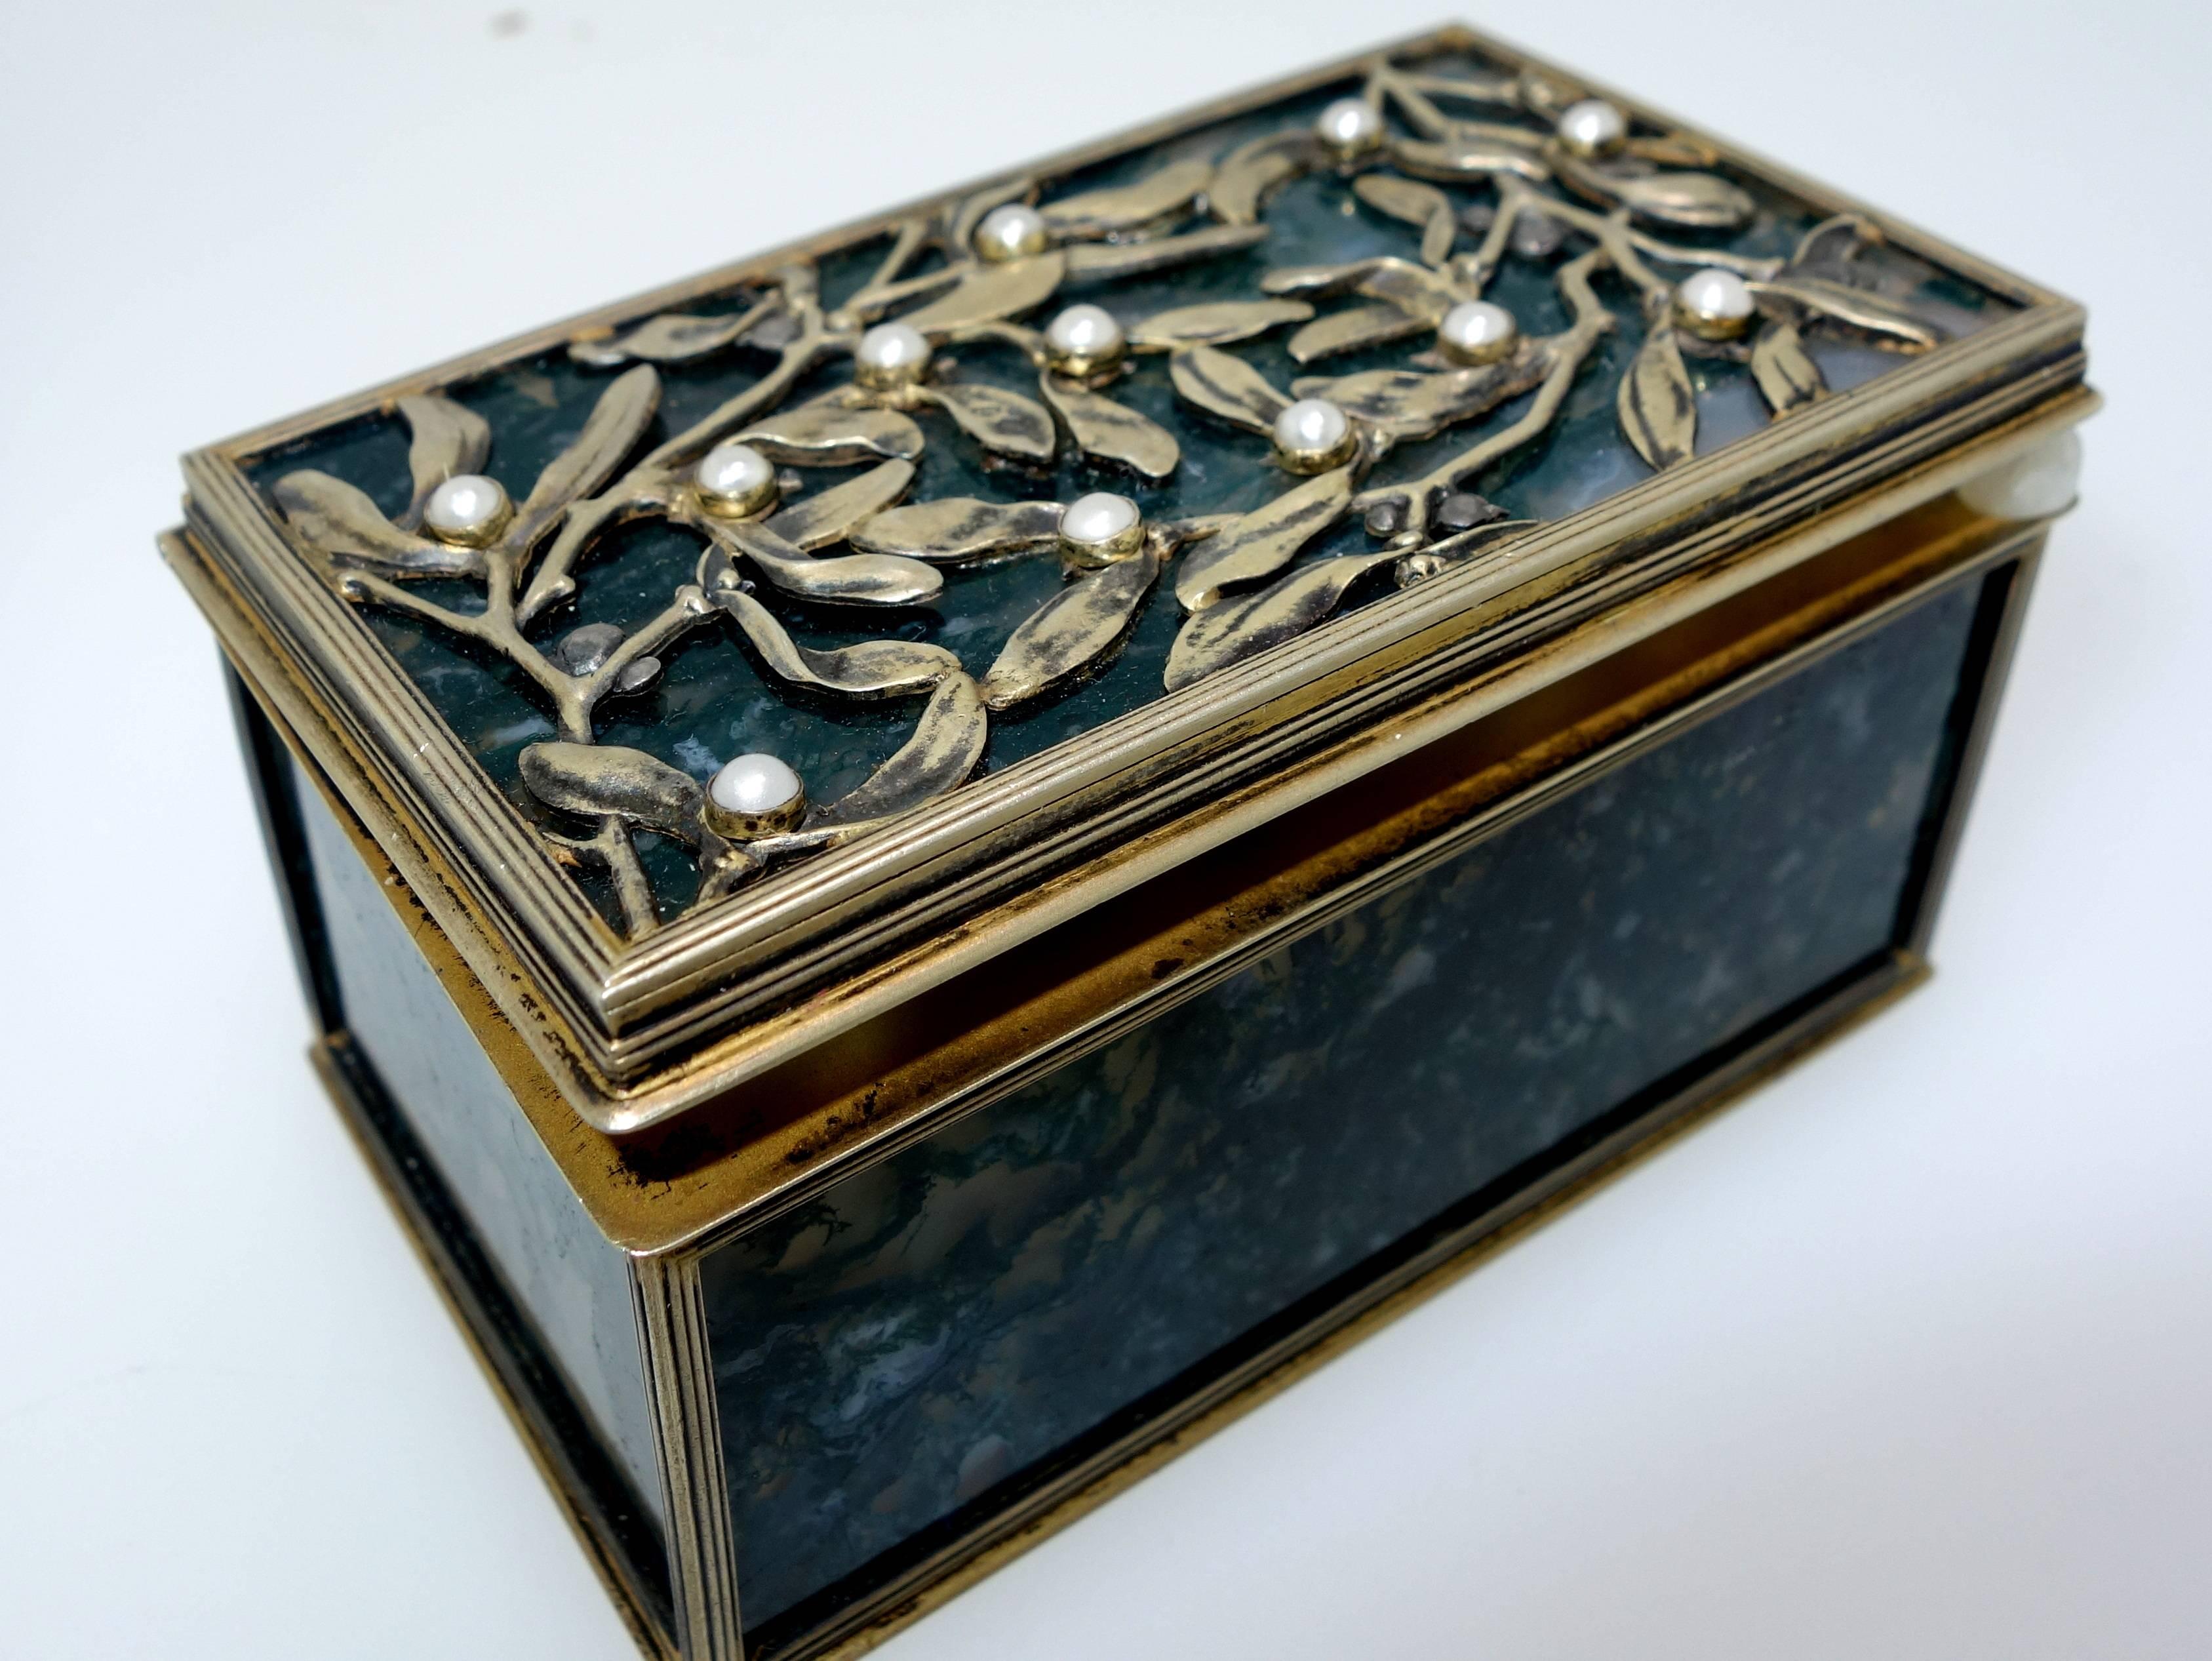 This nephrite and silver box was once owned by Russian royalty.  Please see the documentation received.  The spinach jade is decorated on the top with faux pearls in the Art Nouveau style.  This box is just shy of 3 inches long and 1.75 inches deep